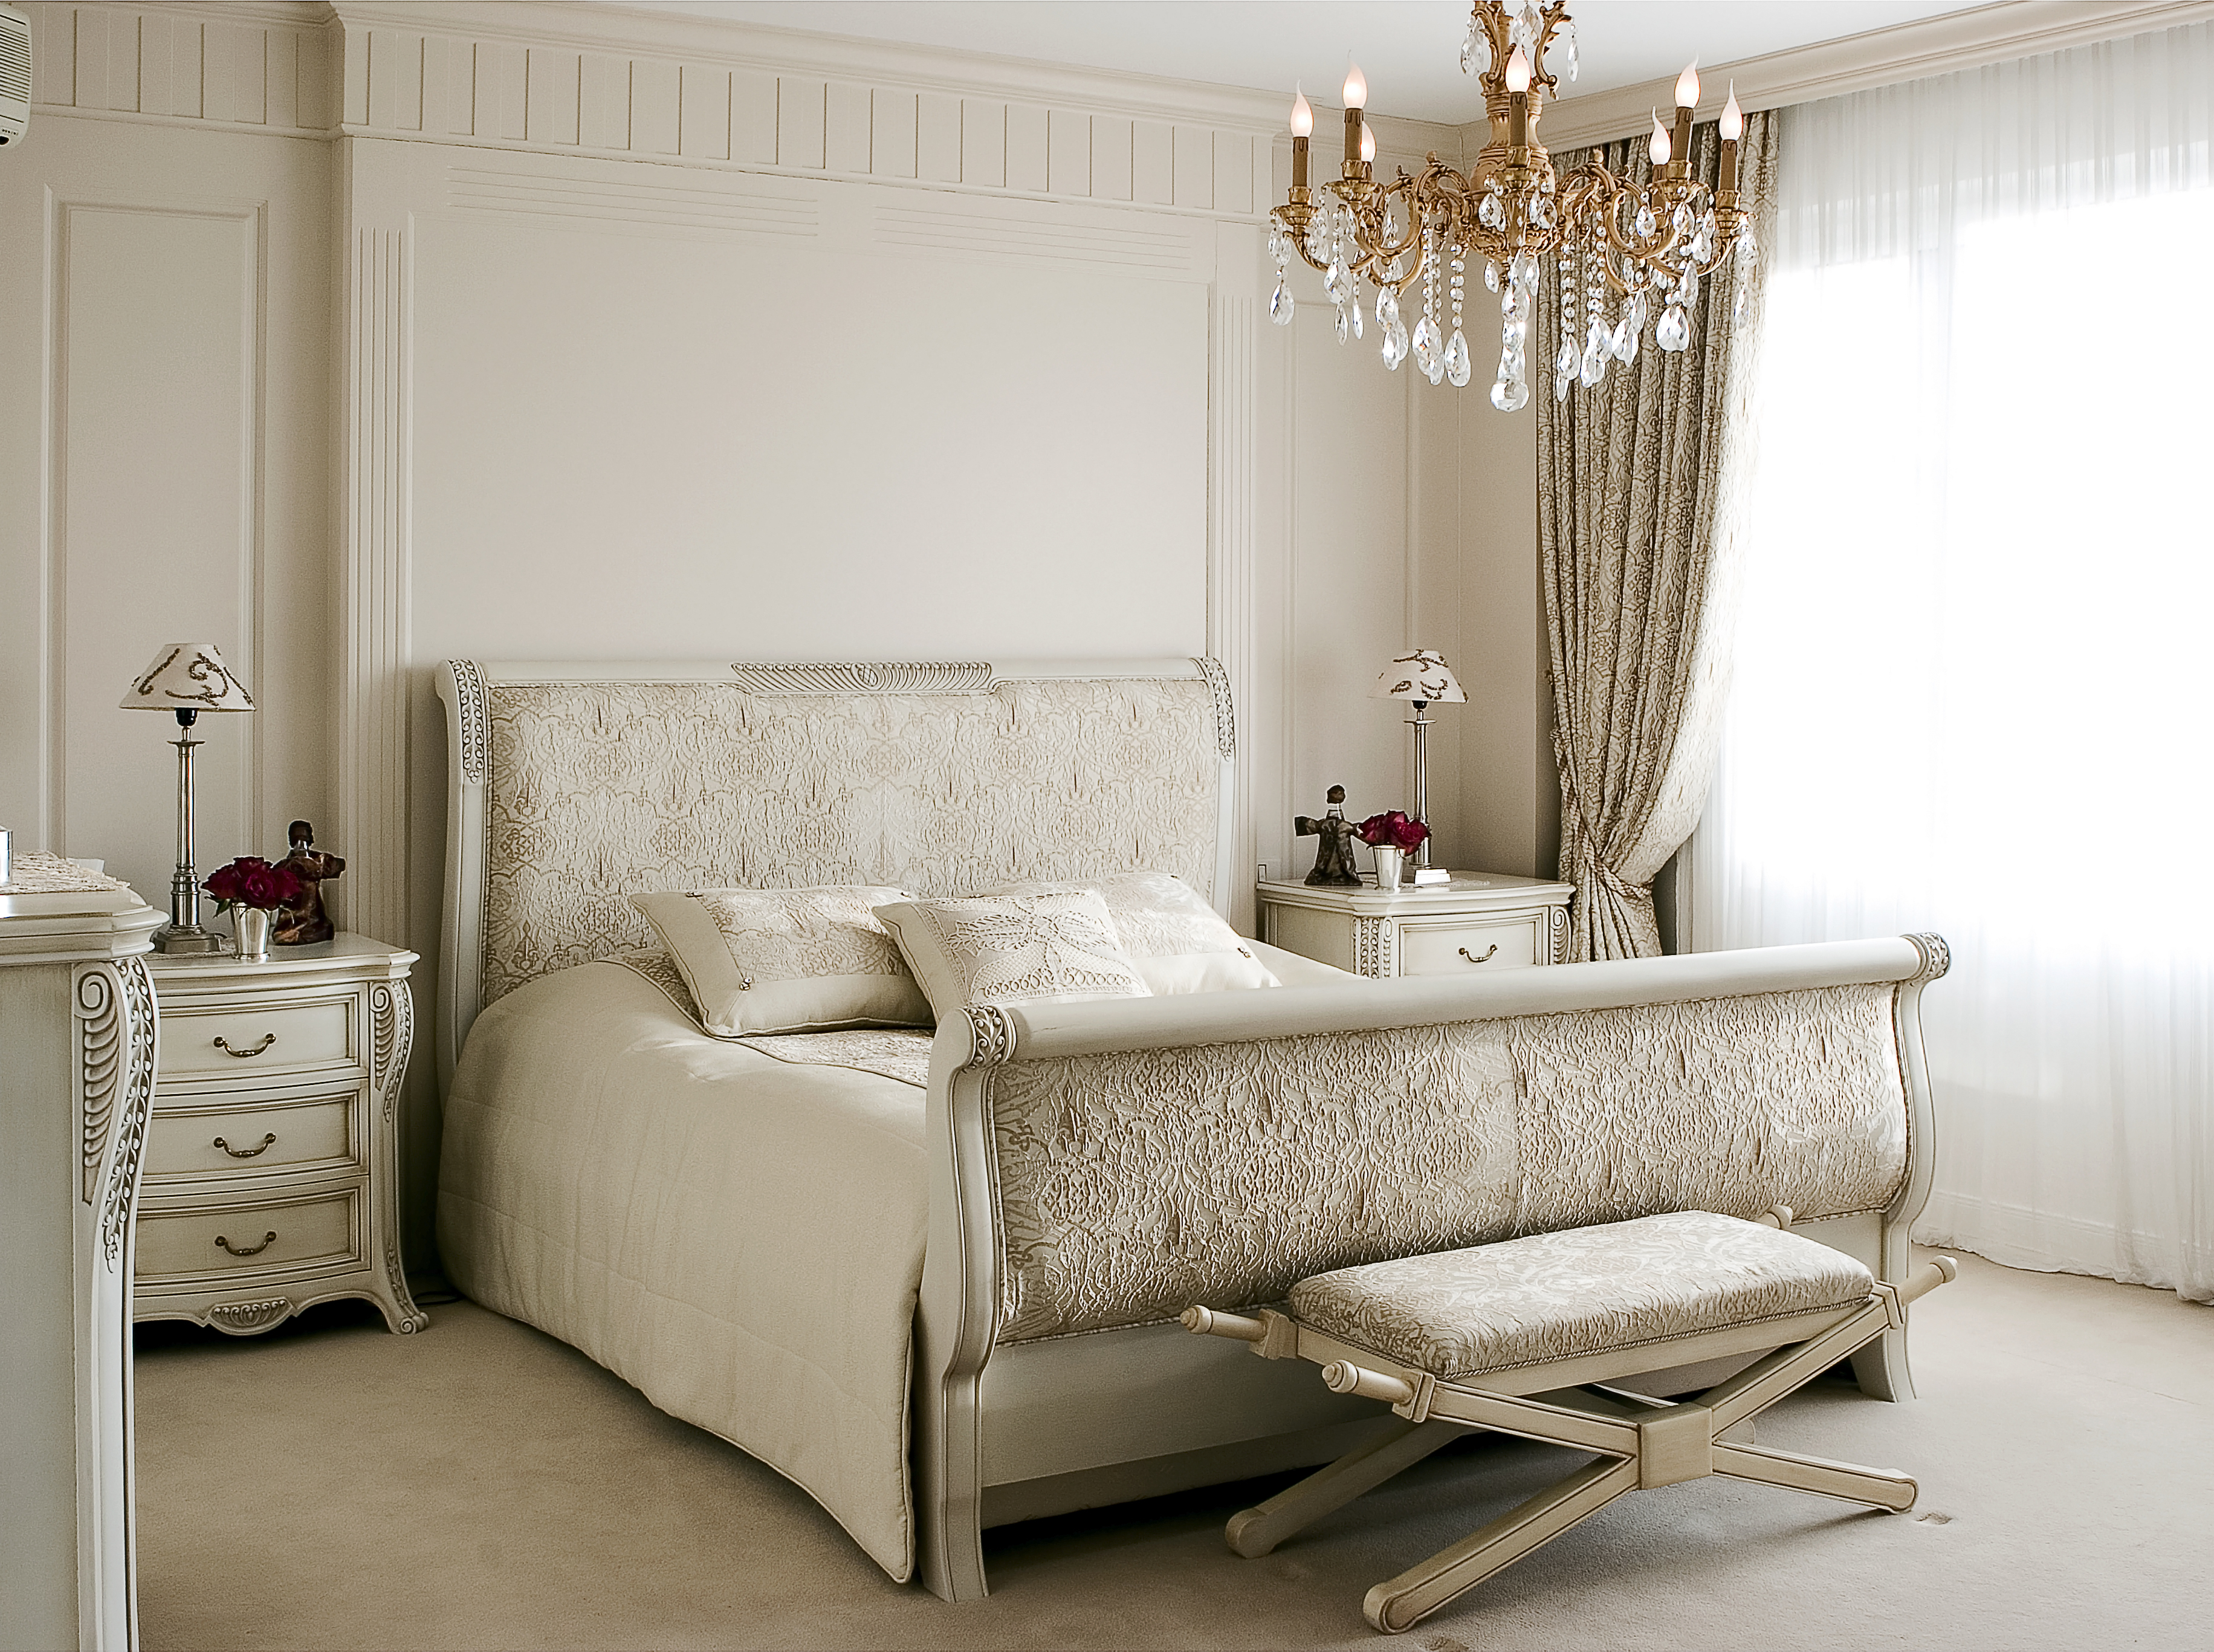 Nice interior designs of bedrooms to check out